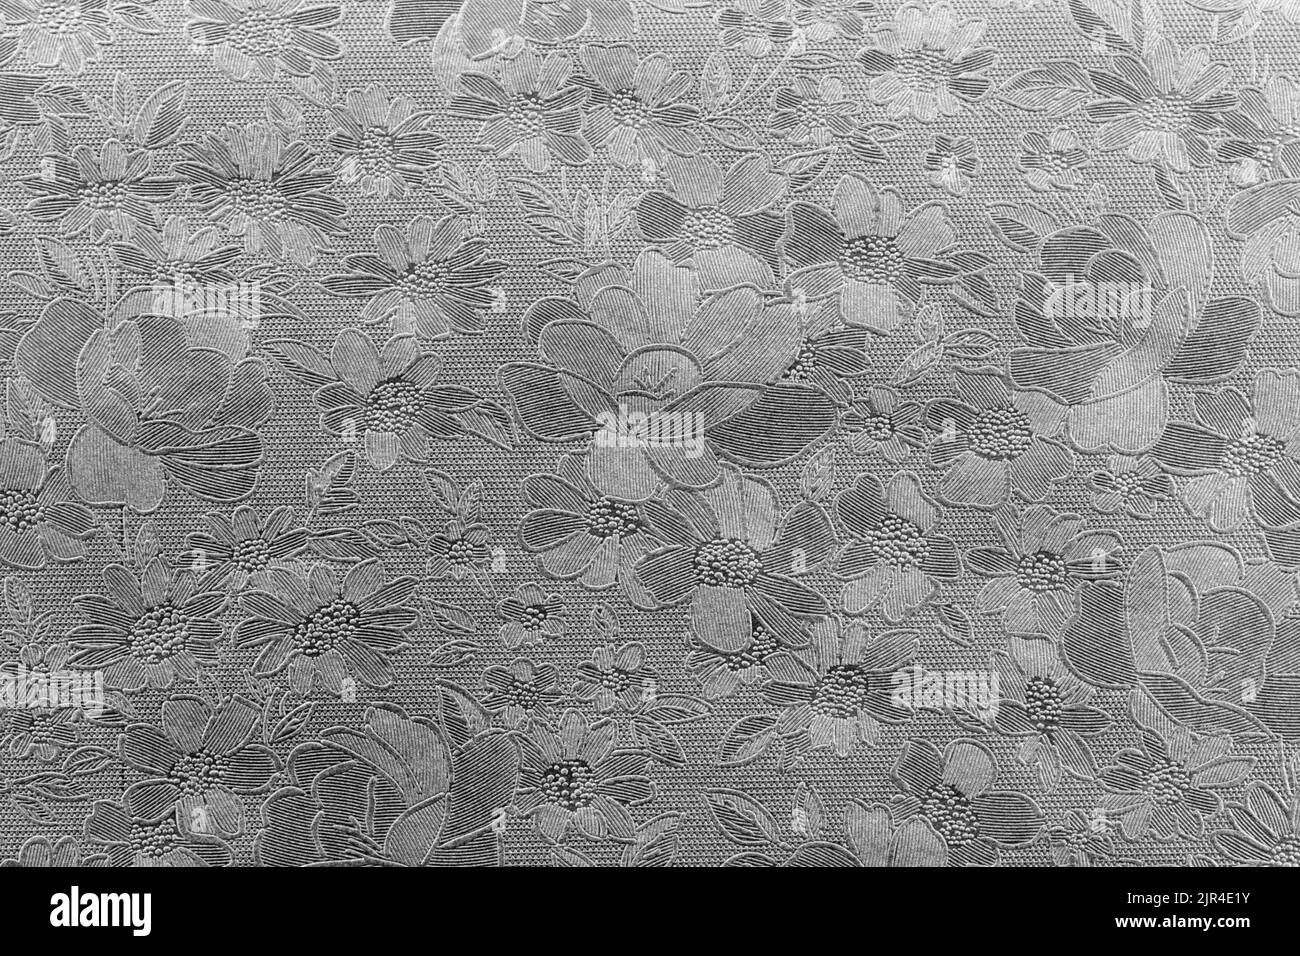 silver floral ornament brocade textile pattern.Gold background texture. Element of design. Stock Photo